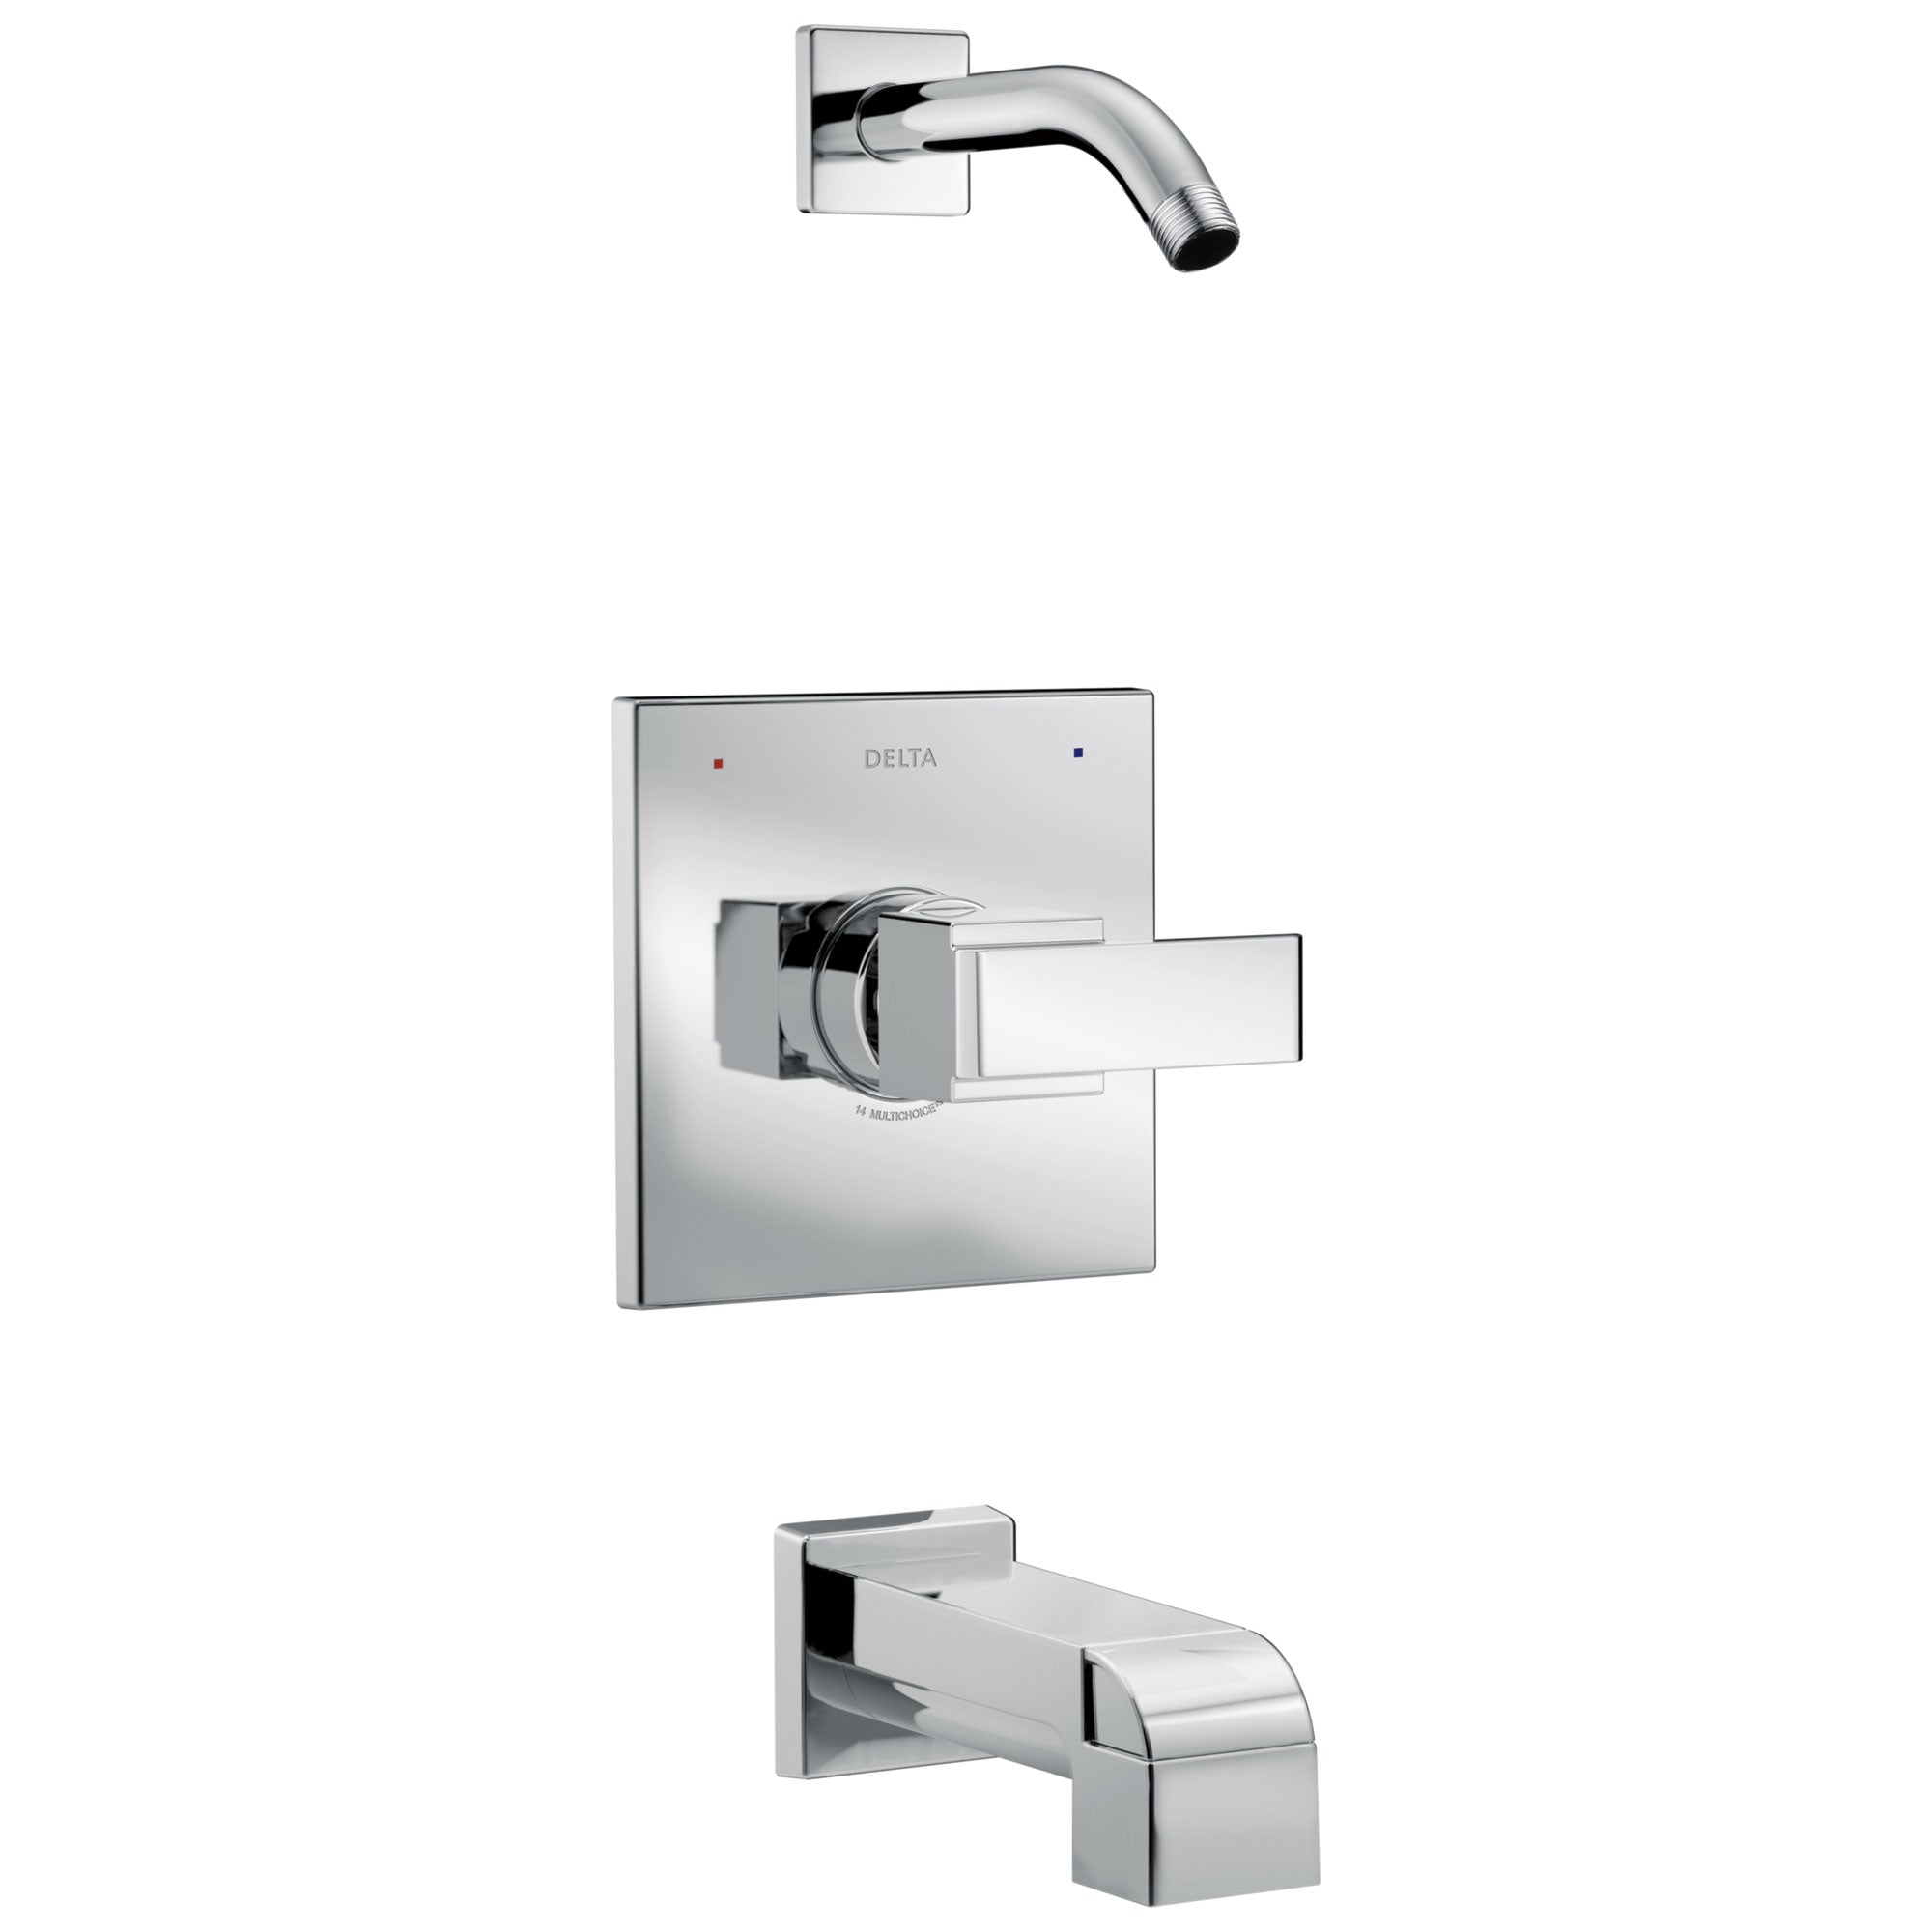 Delta Ara Collection Chrome Monitor 14 Series Modern Square Tub and Shower Combination Faucet - Less Showerhead Includes Trim Kit Rough Valve without Stops D2379V